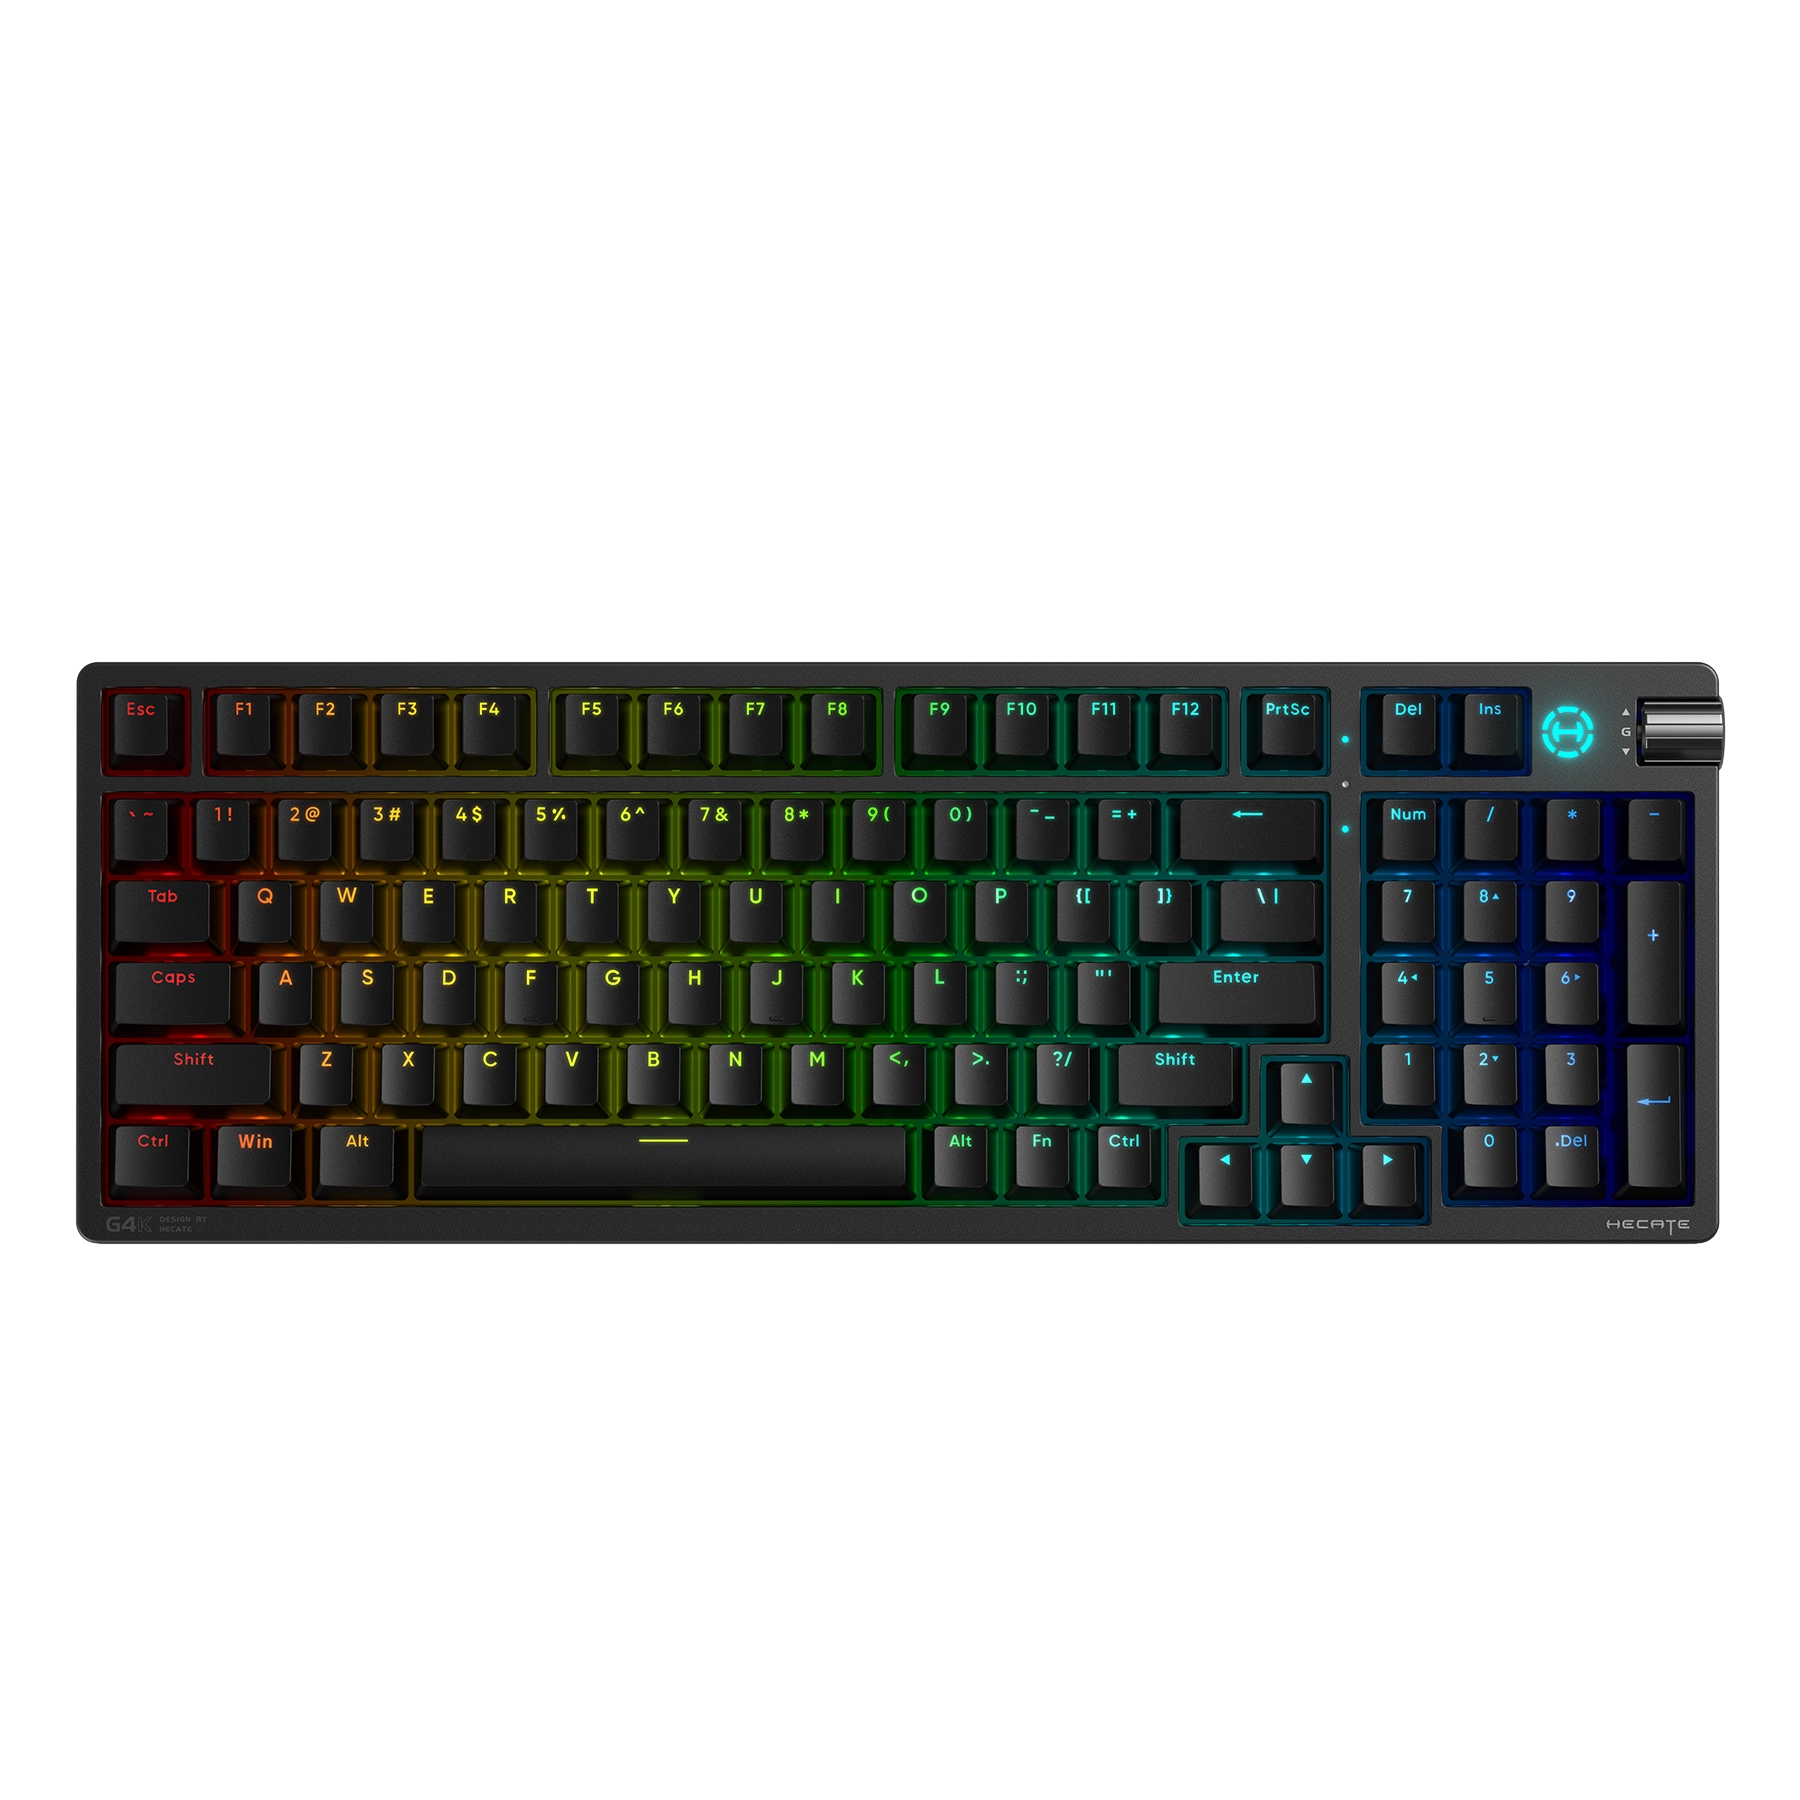 G4K keyboard product pictures black_